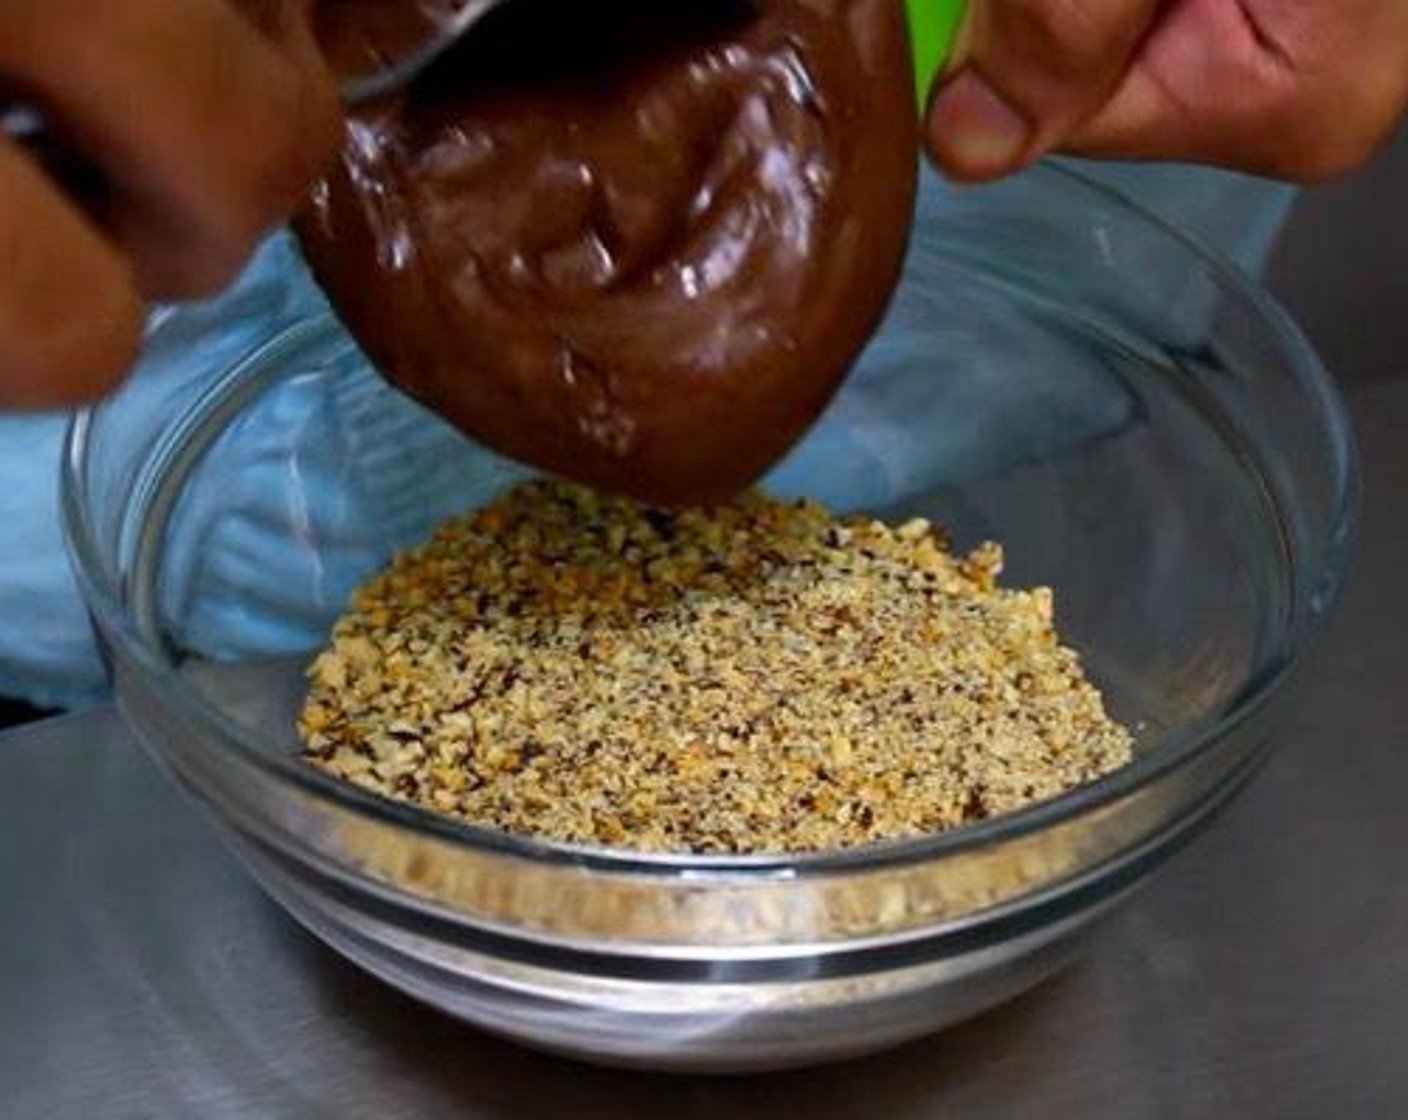 step 1 Add Toasted Hazelnuts (3/4 cup) to a bowl and top with Nutella® (1 cup). Use a spoon to mix it up. Put it in the freezer for 30 minutes to 1 hour.